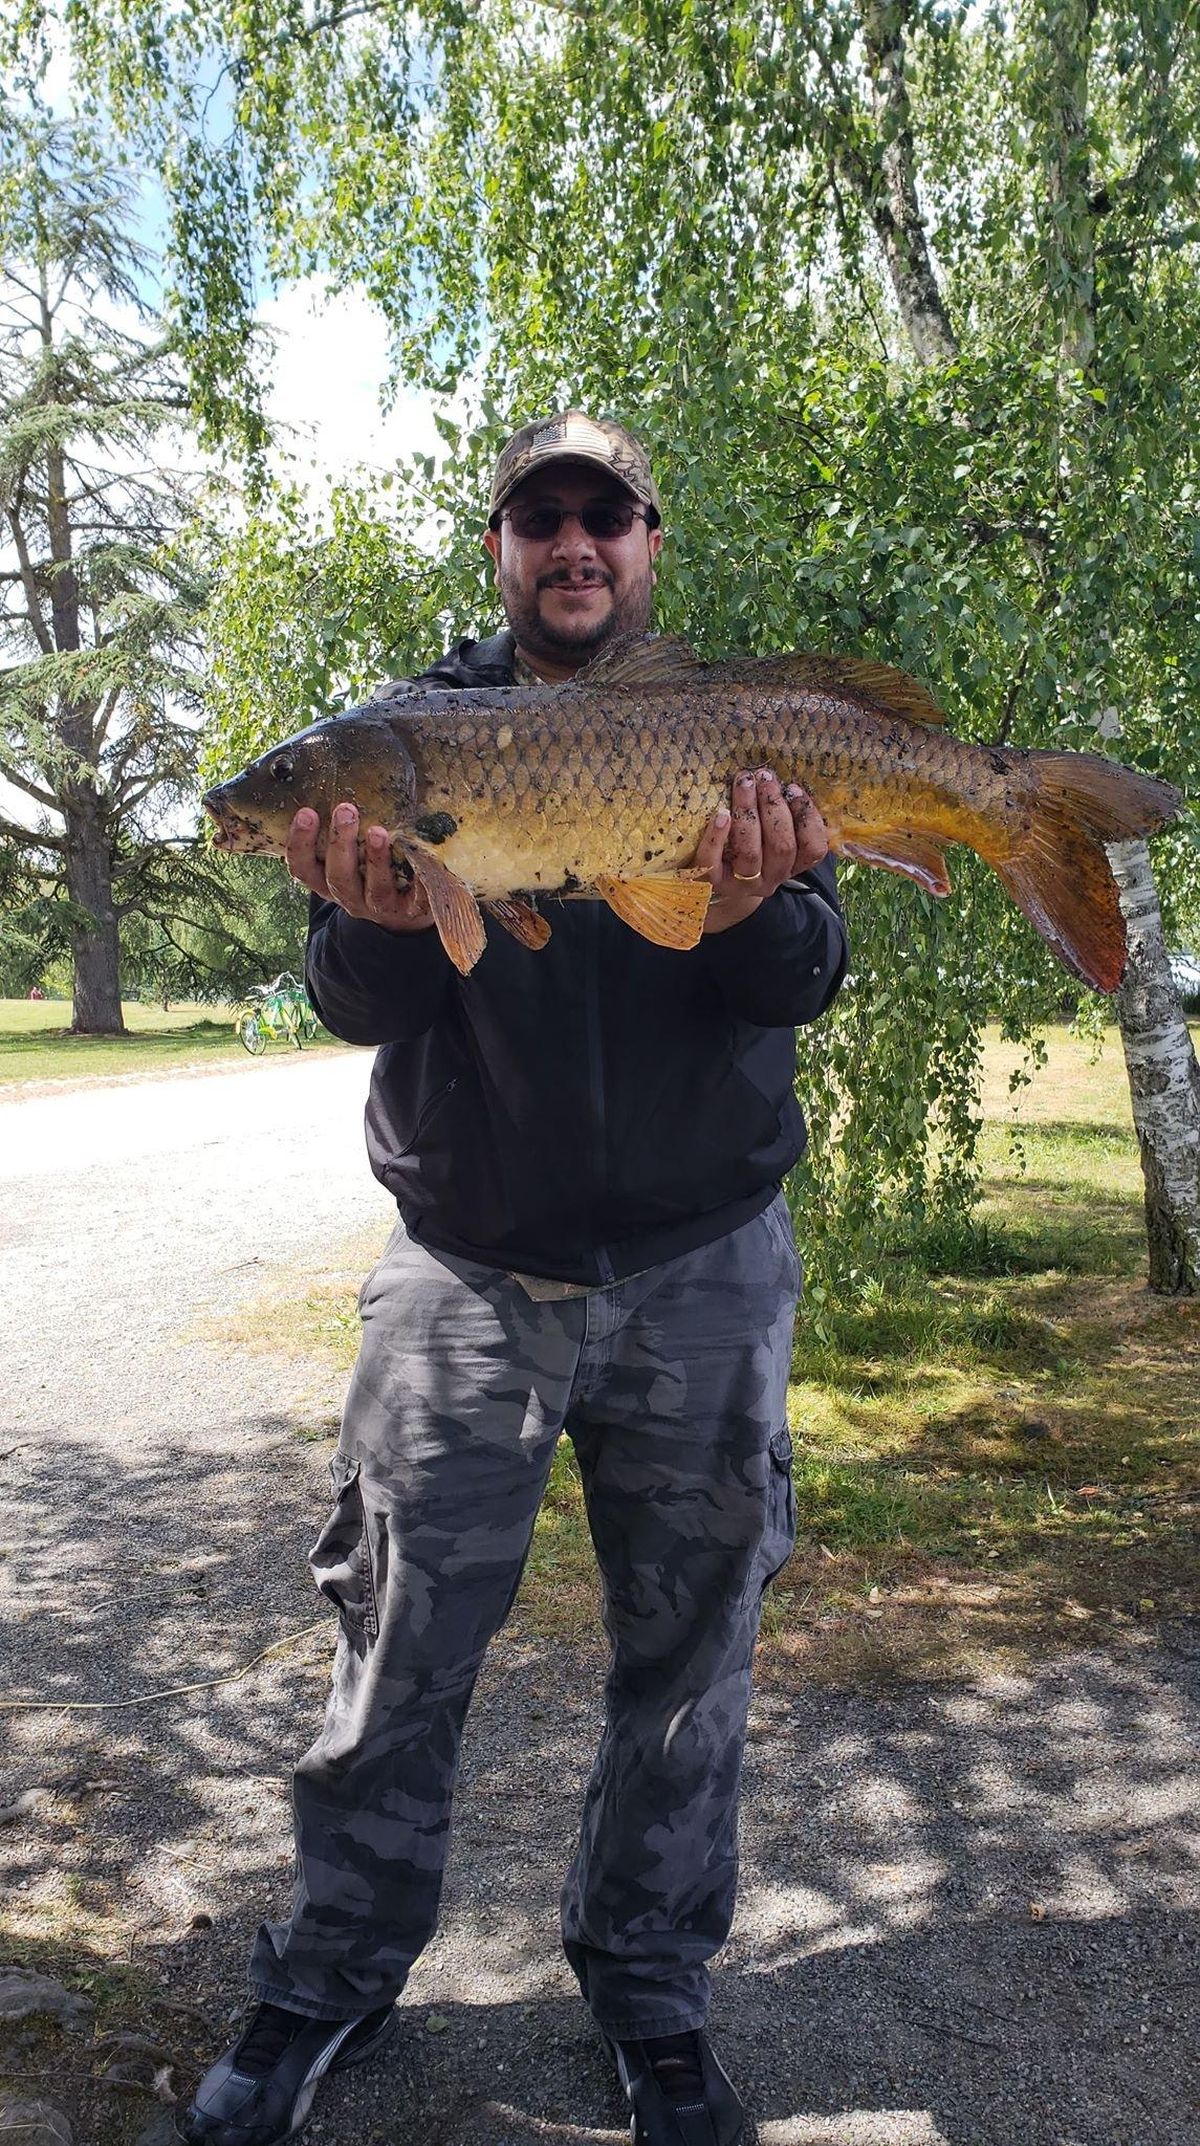 Ahmed Majeed shows off his catch of a huge carp on Saturday, June 9 at Green Lake. (Courtesy of / Ahmed Majeed)